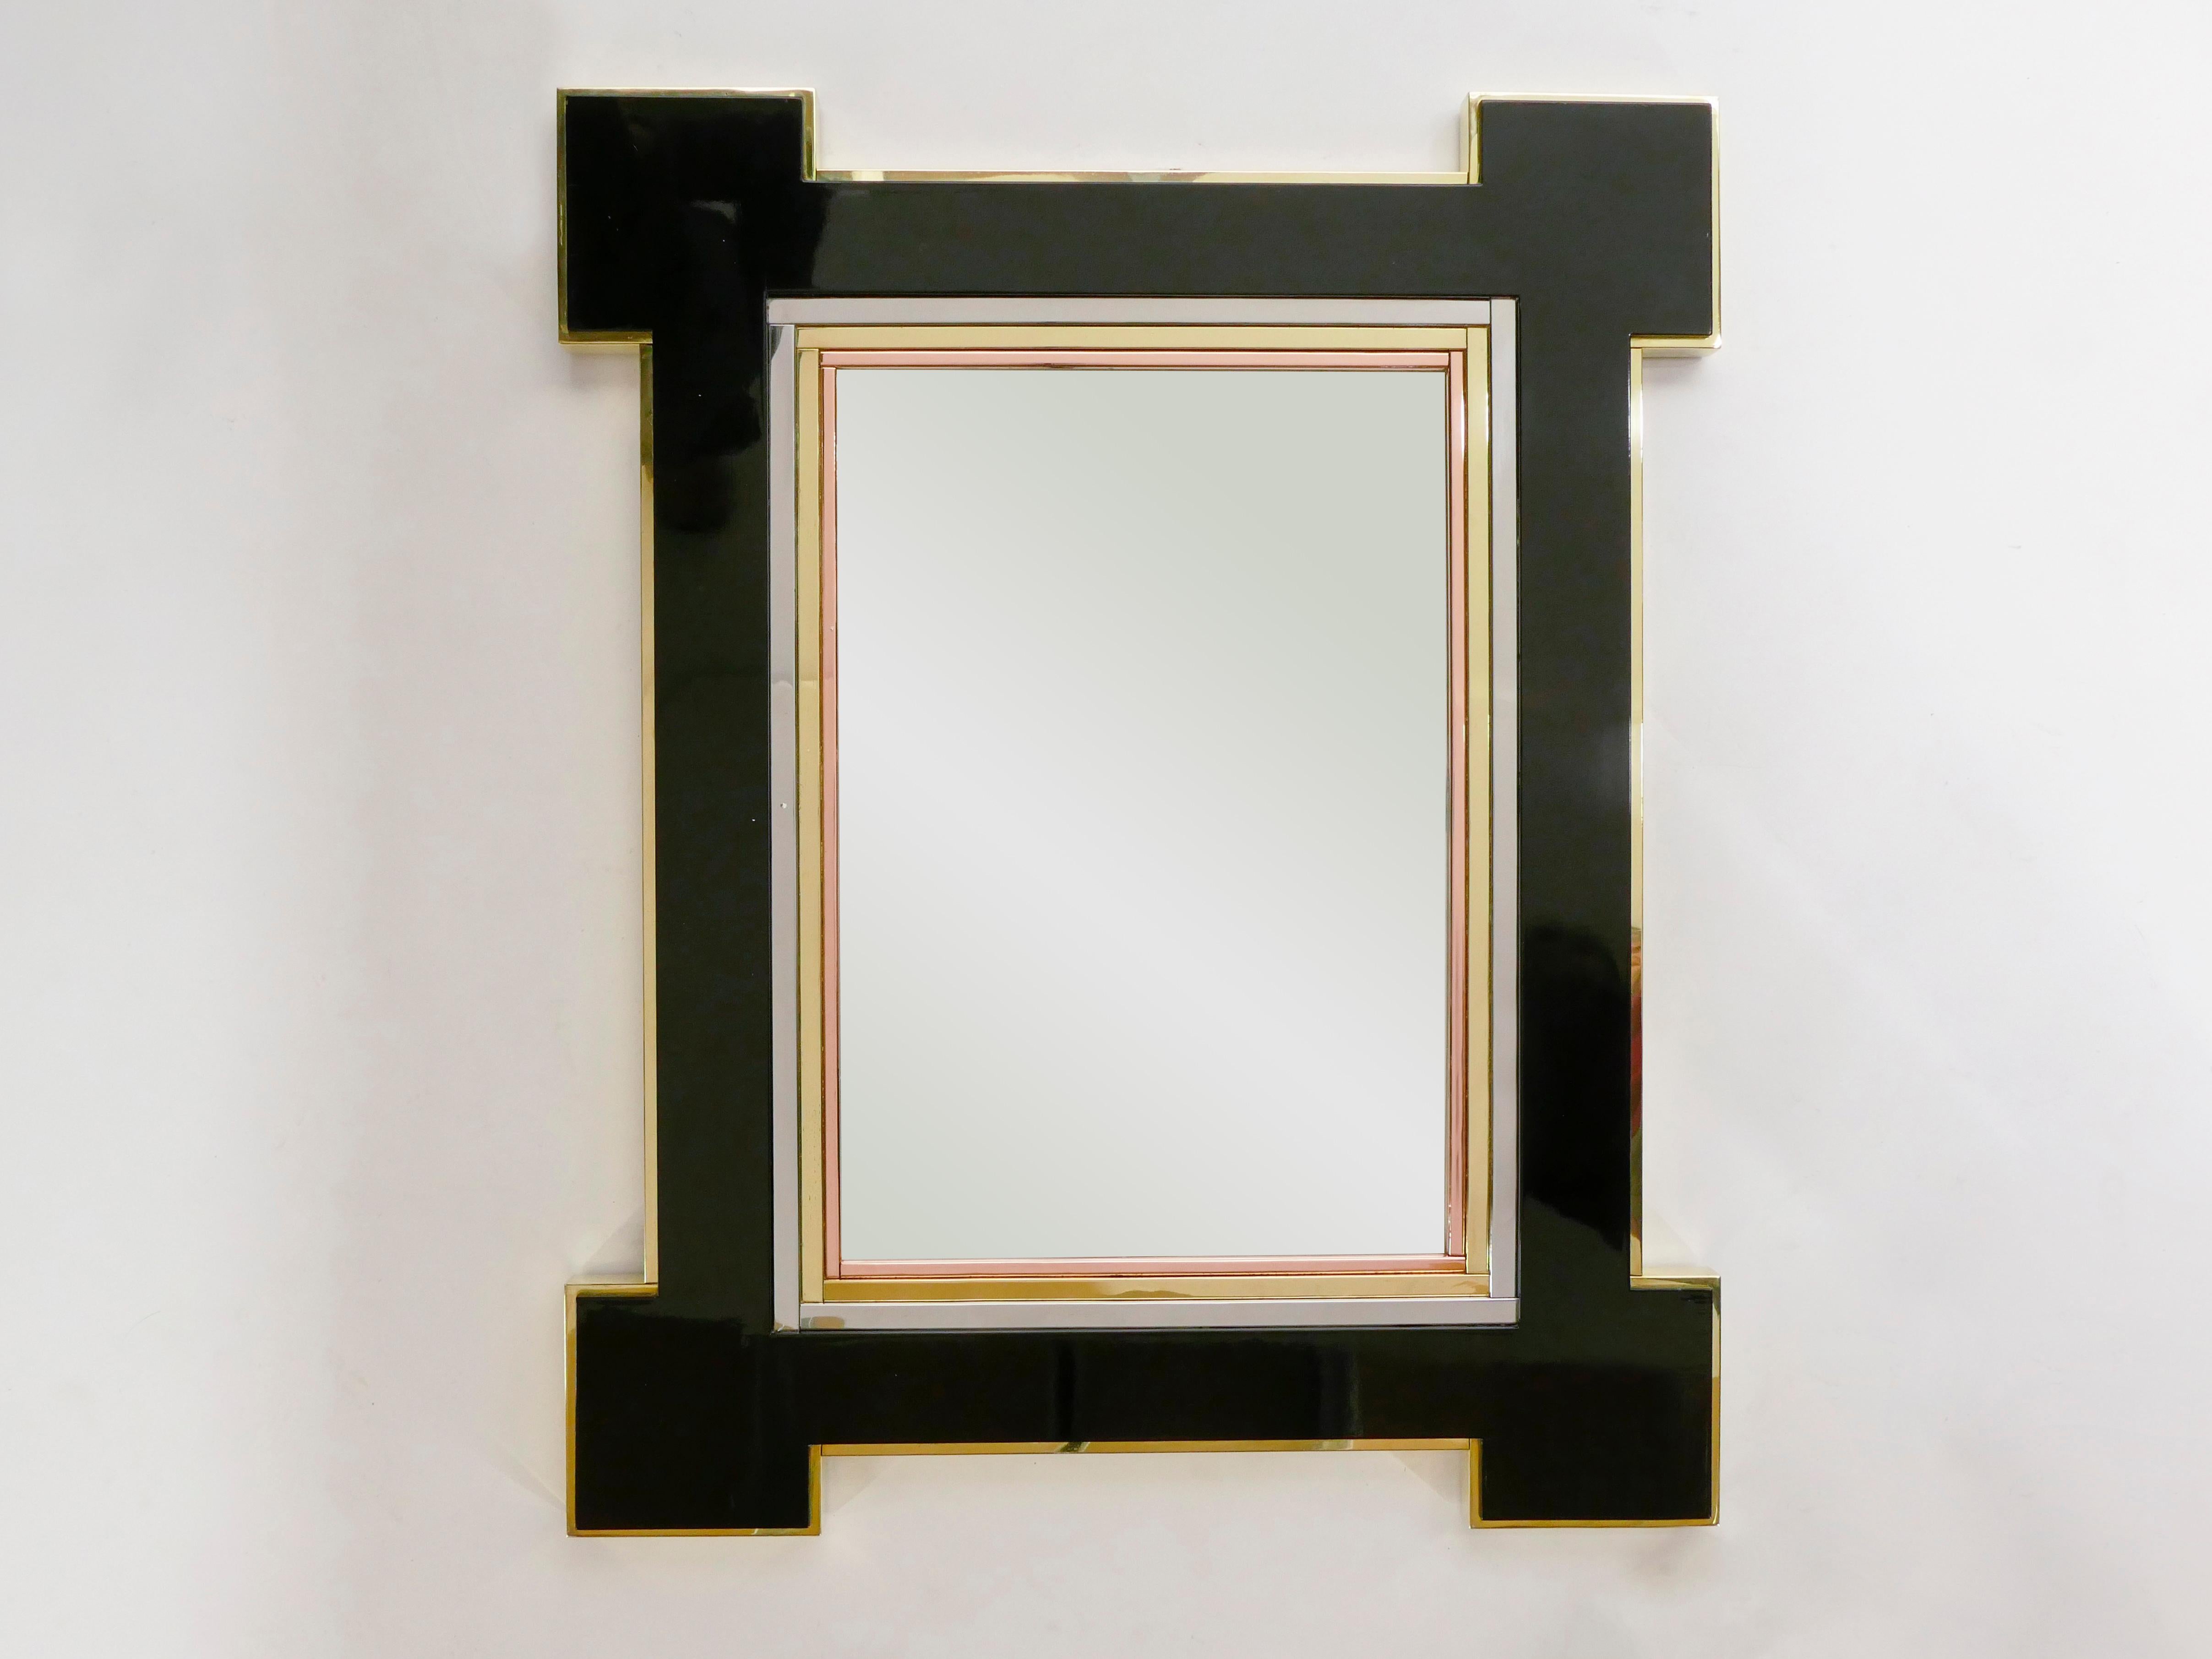 The black lacquer and mix of metals with brass copper and chrome layers make up the decorative frame of this beautiful and rare large wall mirror designed by Alain Delon and edited by Maison Jansen in 1975. It was first presented in Salone del